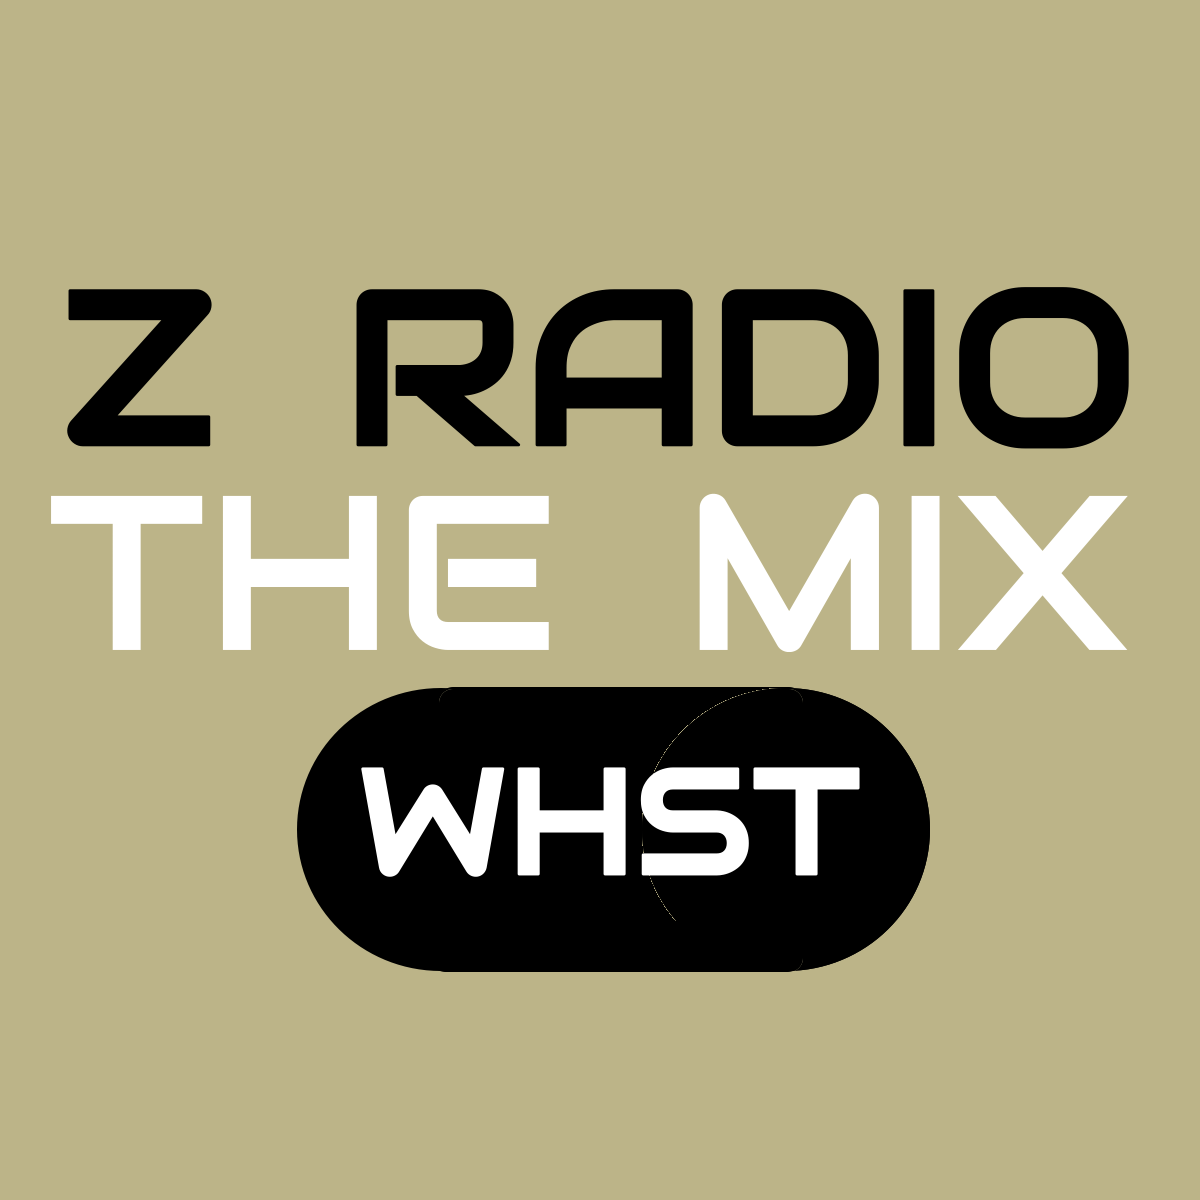 Art for Z RADIO THE MIX by Christian Music Radio